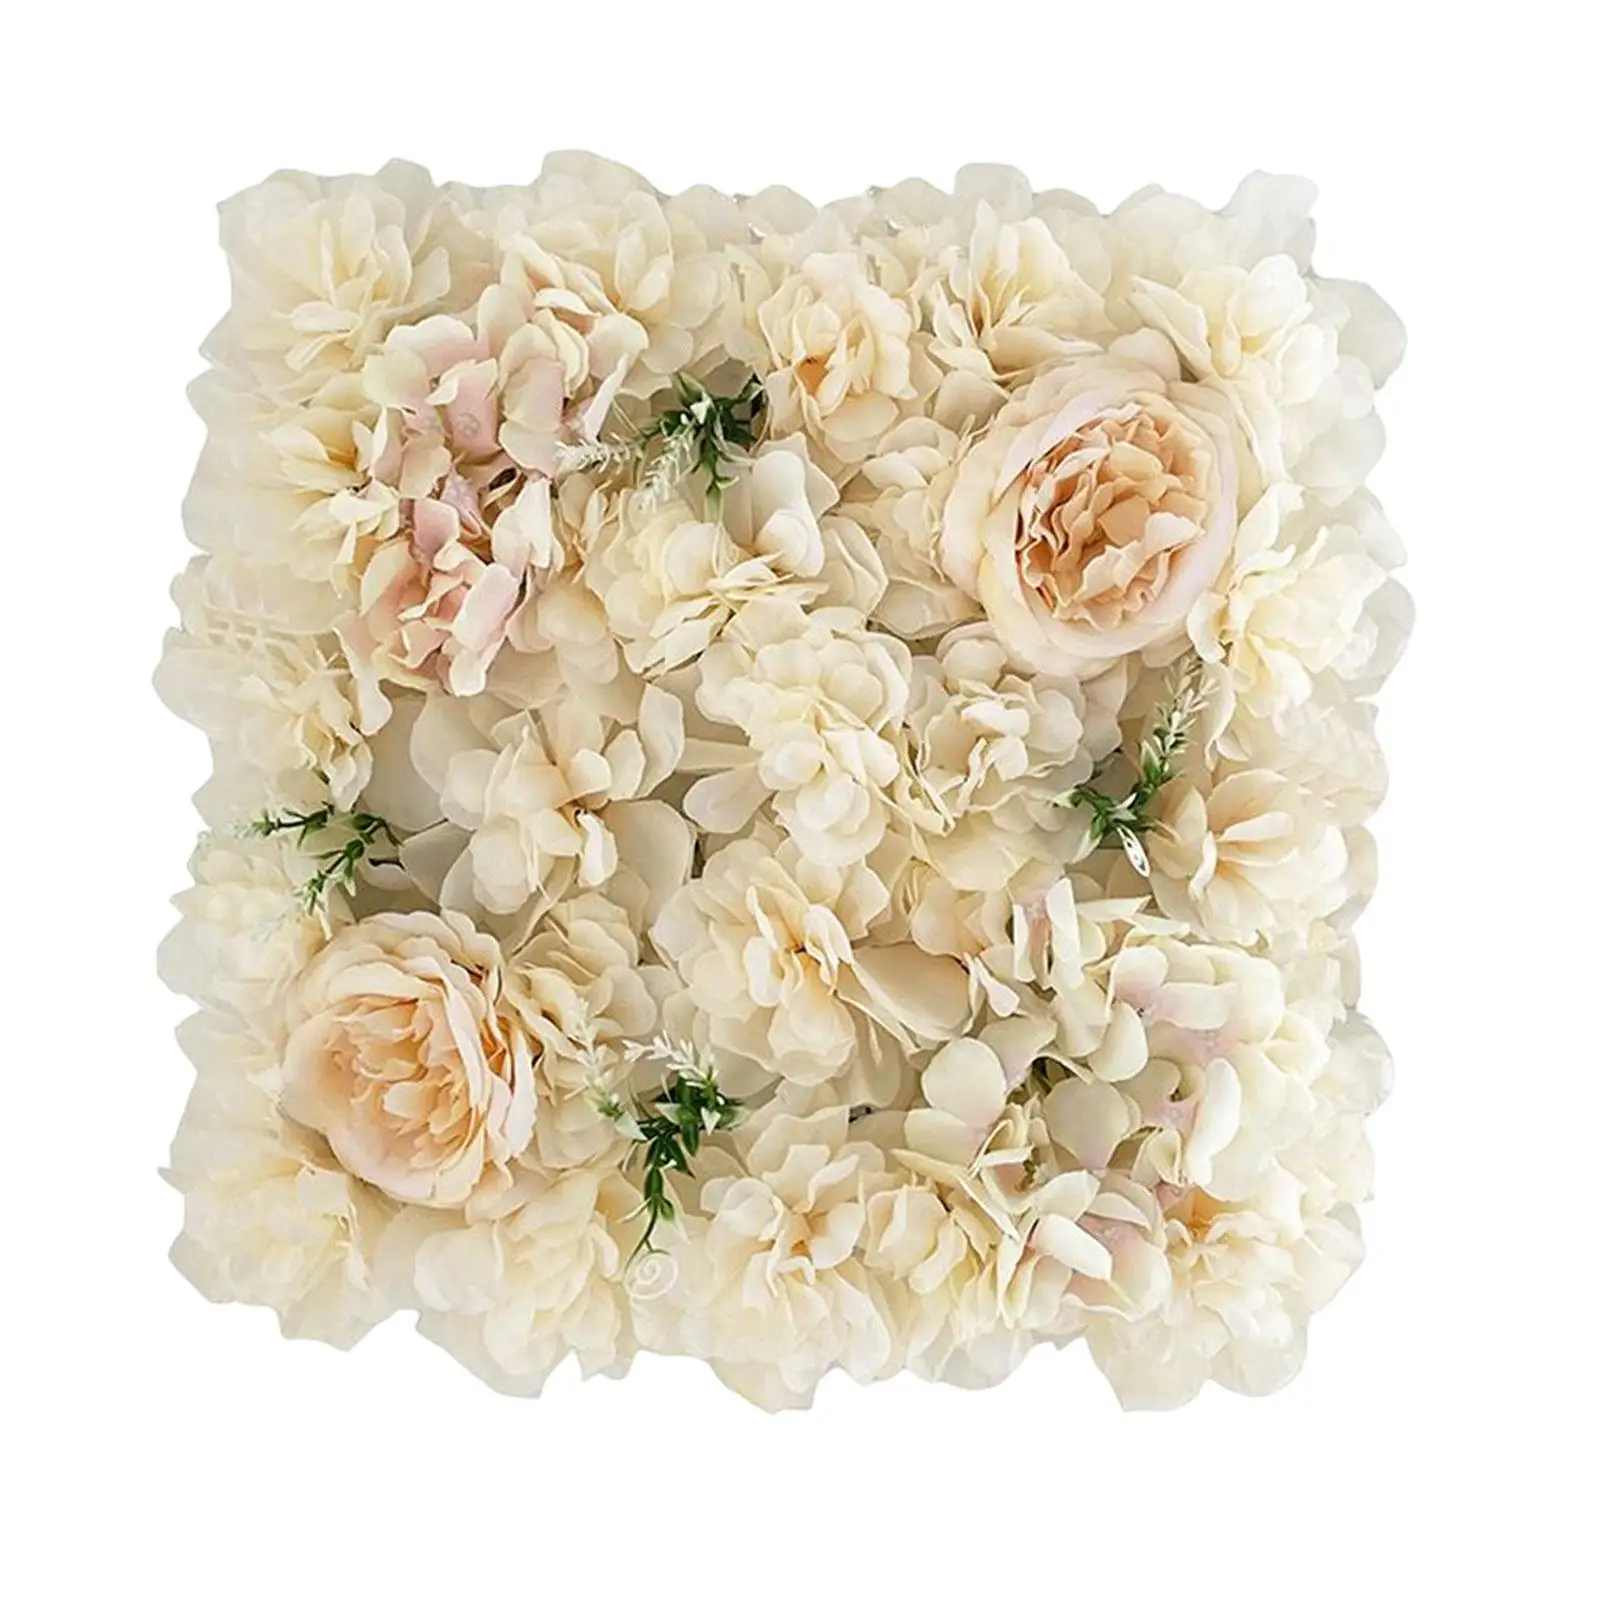 Artificial Flower Wall Panel Flower Arrangements Rose Photo Background for Wedding Party Valentines Day Outdoor Wall Decor